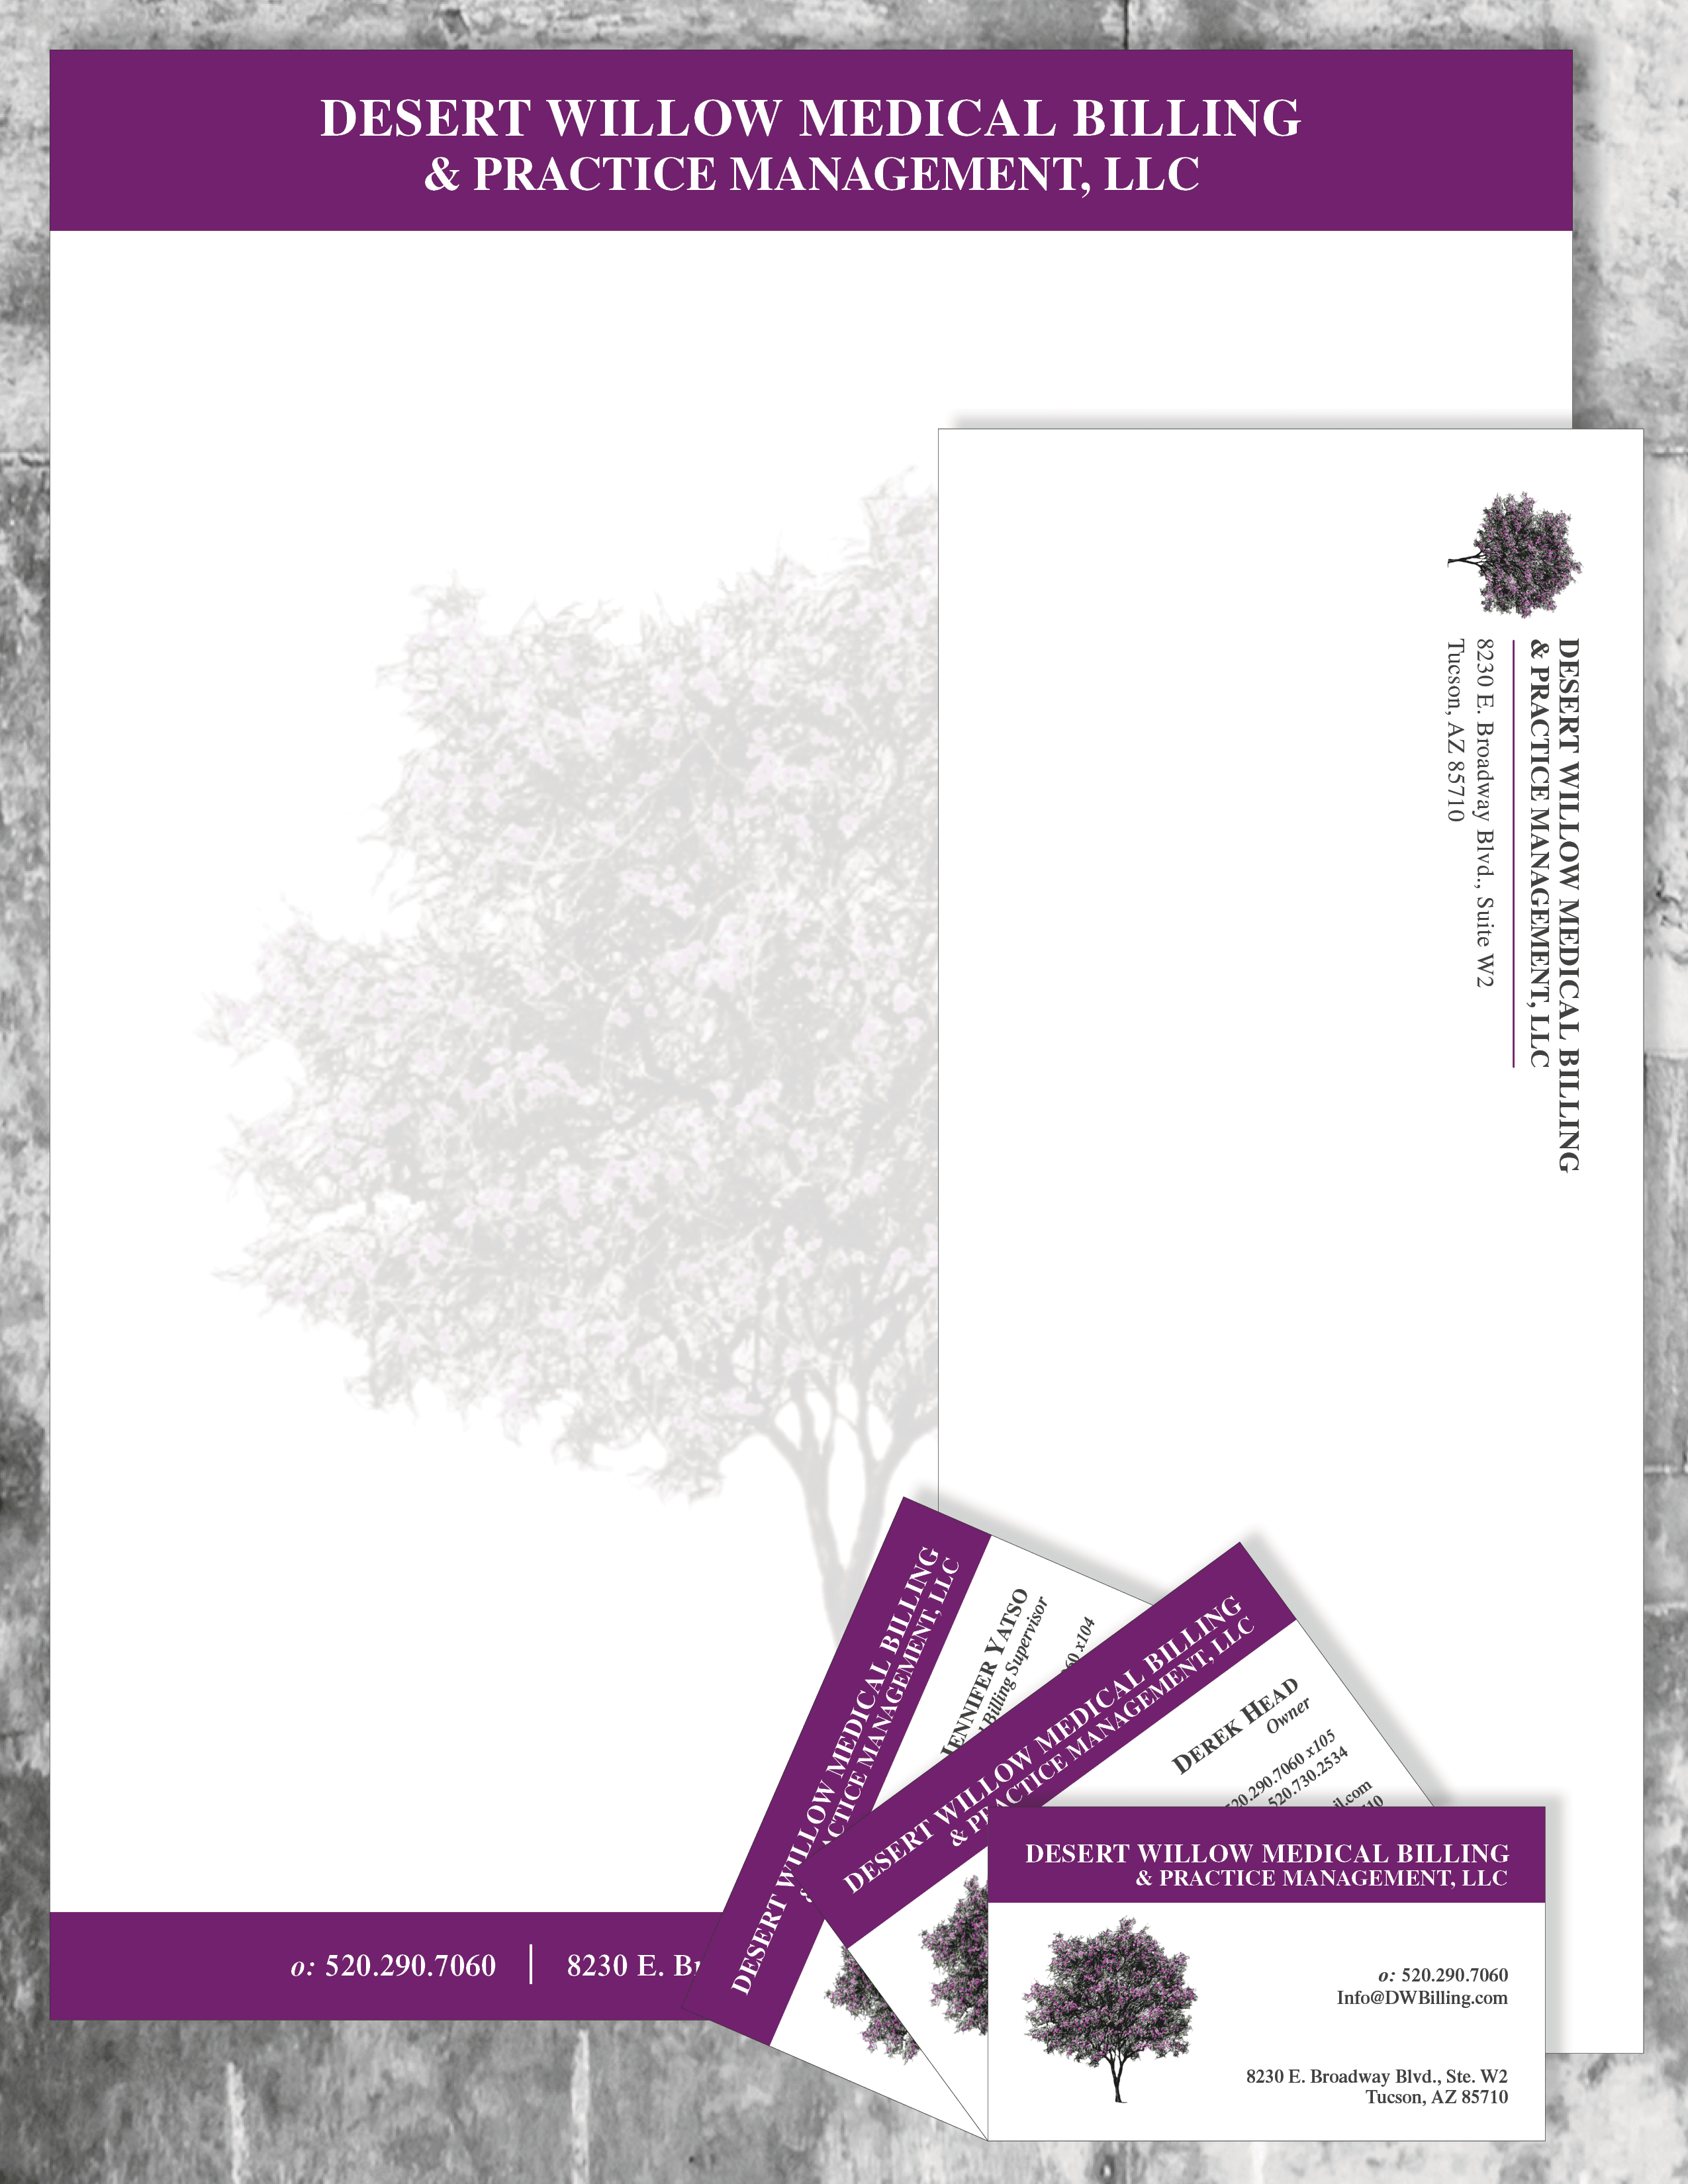 Branding Concept Showing Purple and White Letterheads, Envelopes, and Business Cards for a Business with a Tree Logo